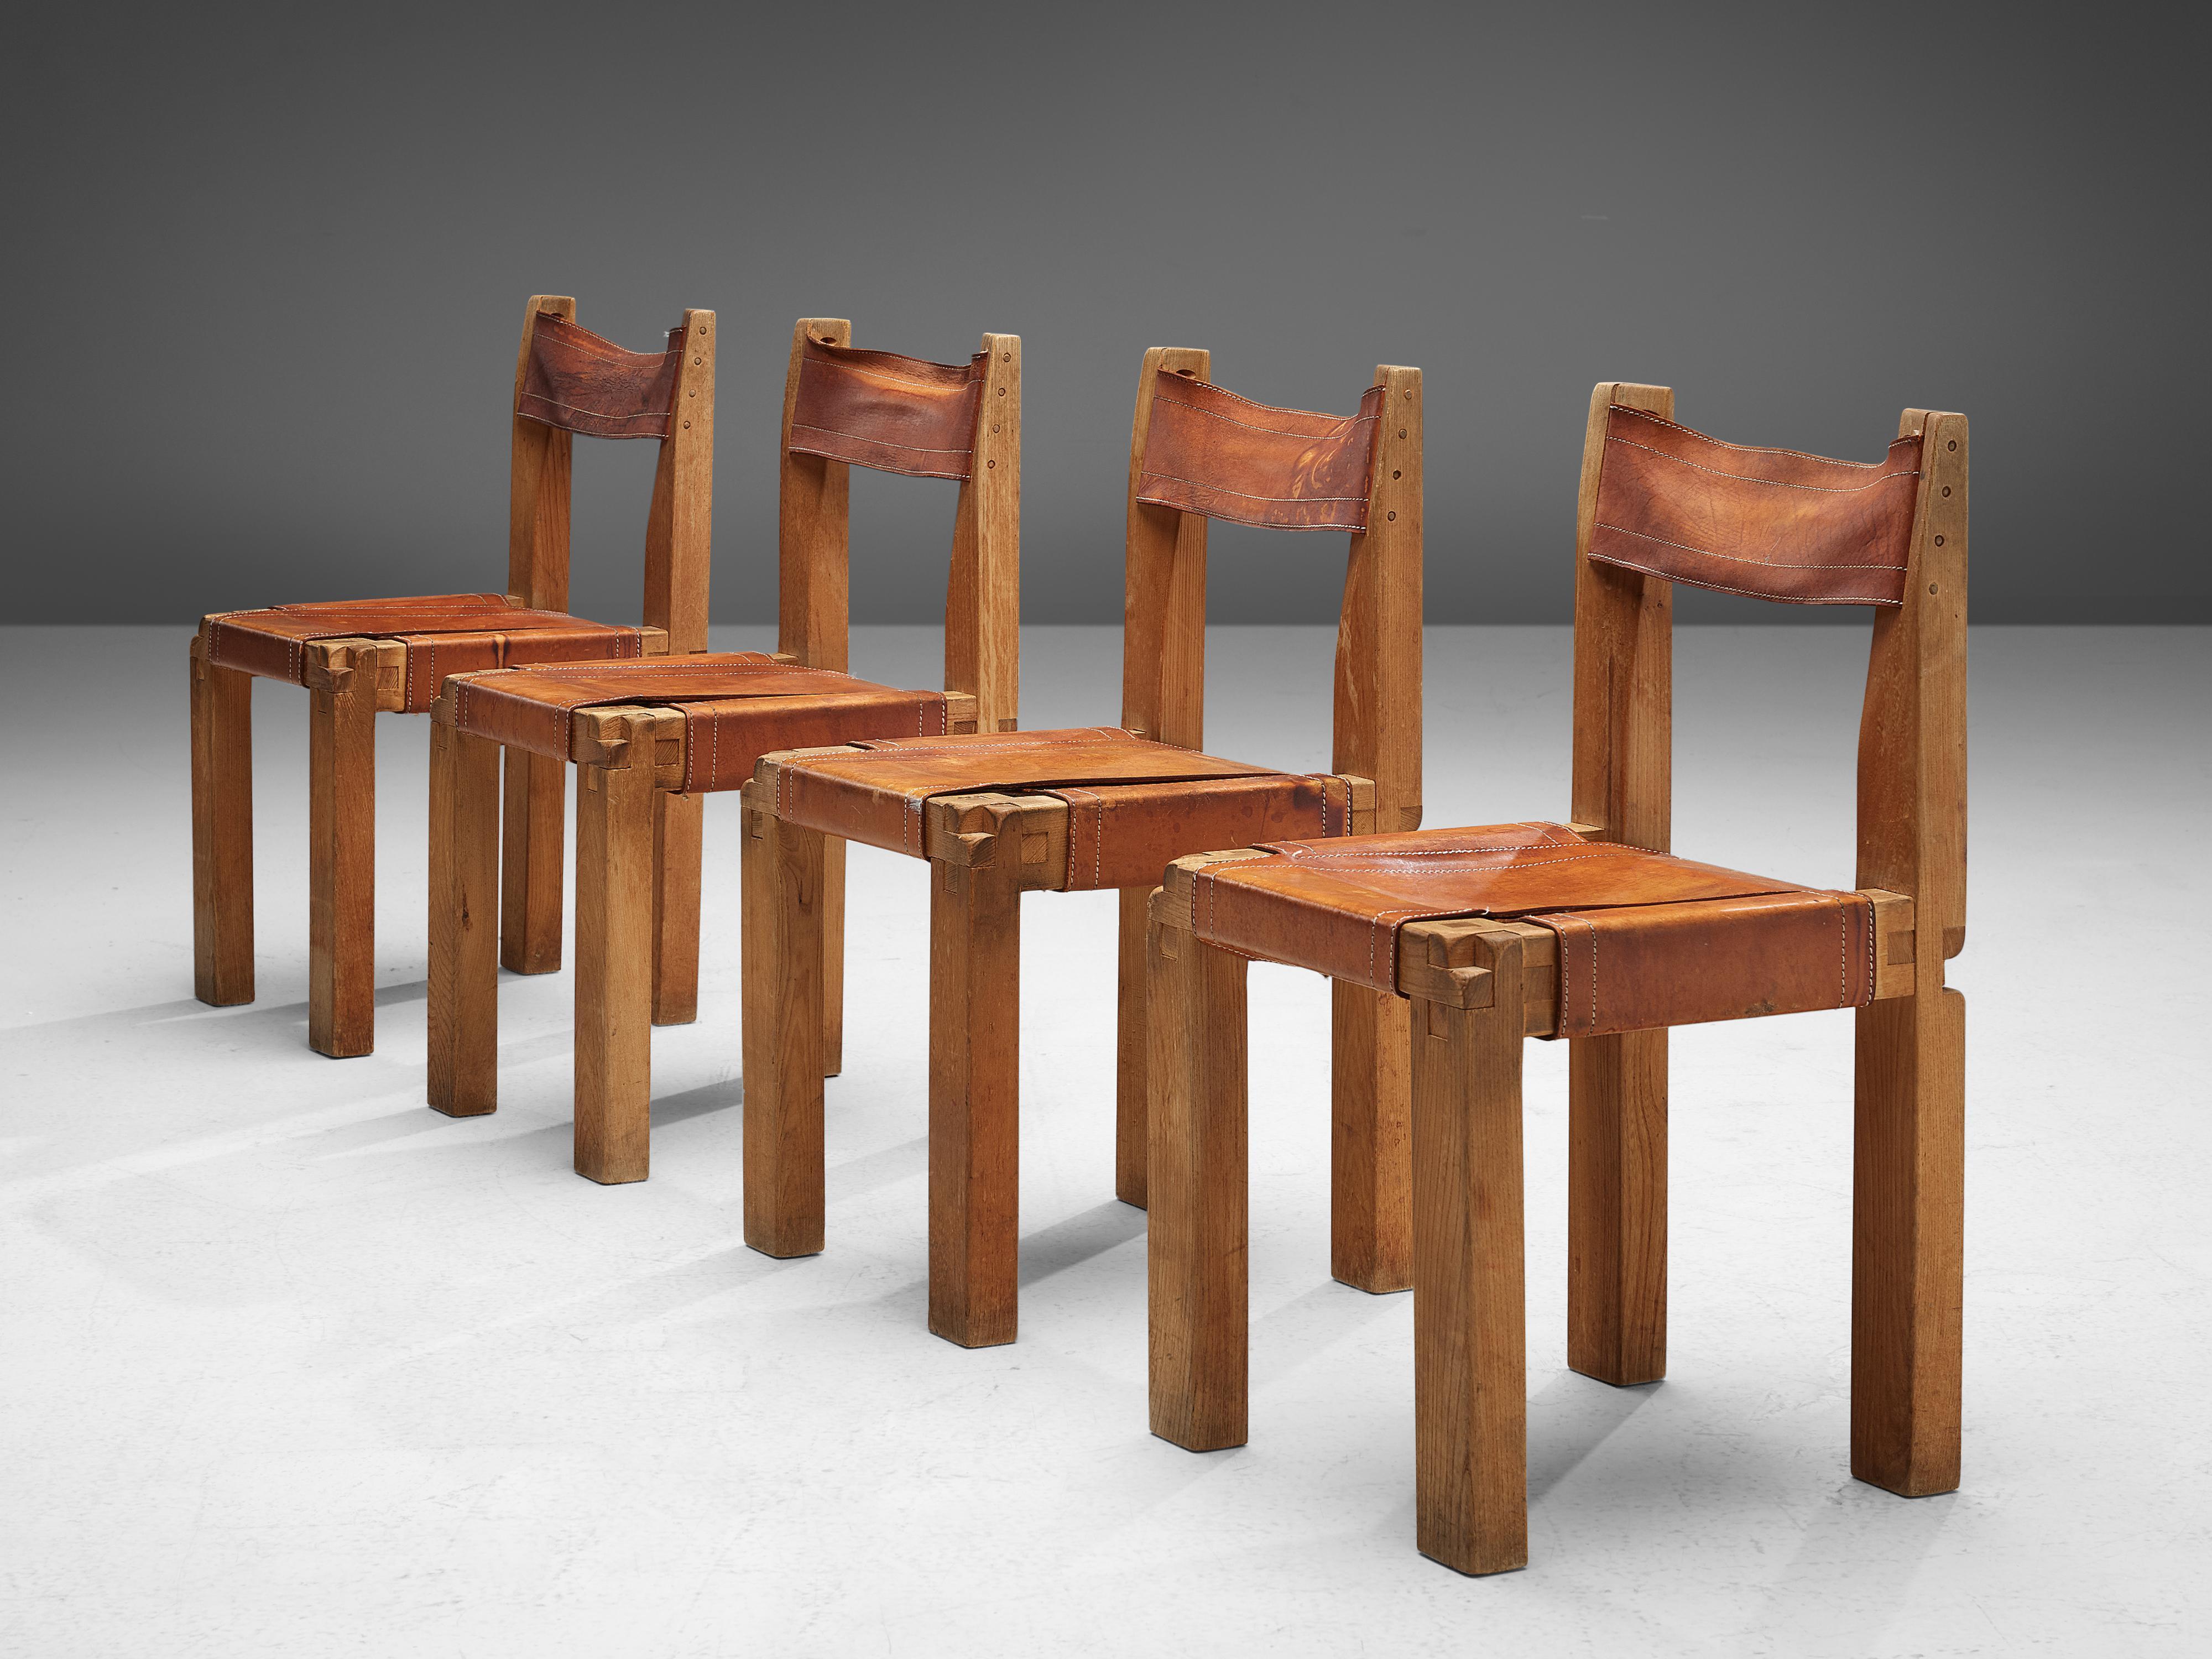 Mid-20th Century Pierre Chapo Set of 4 Dining Chairs Model 'S11' in Patinated Cognac Leather